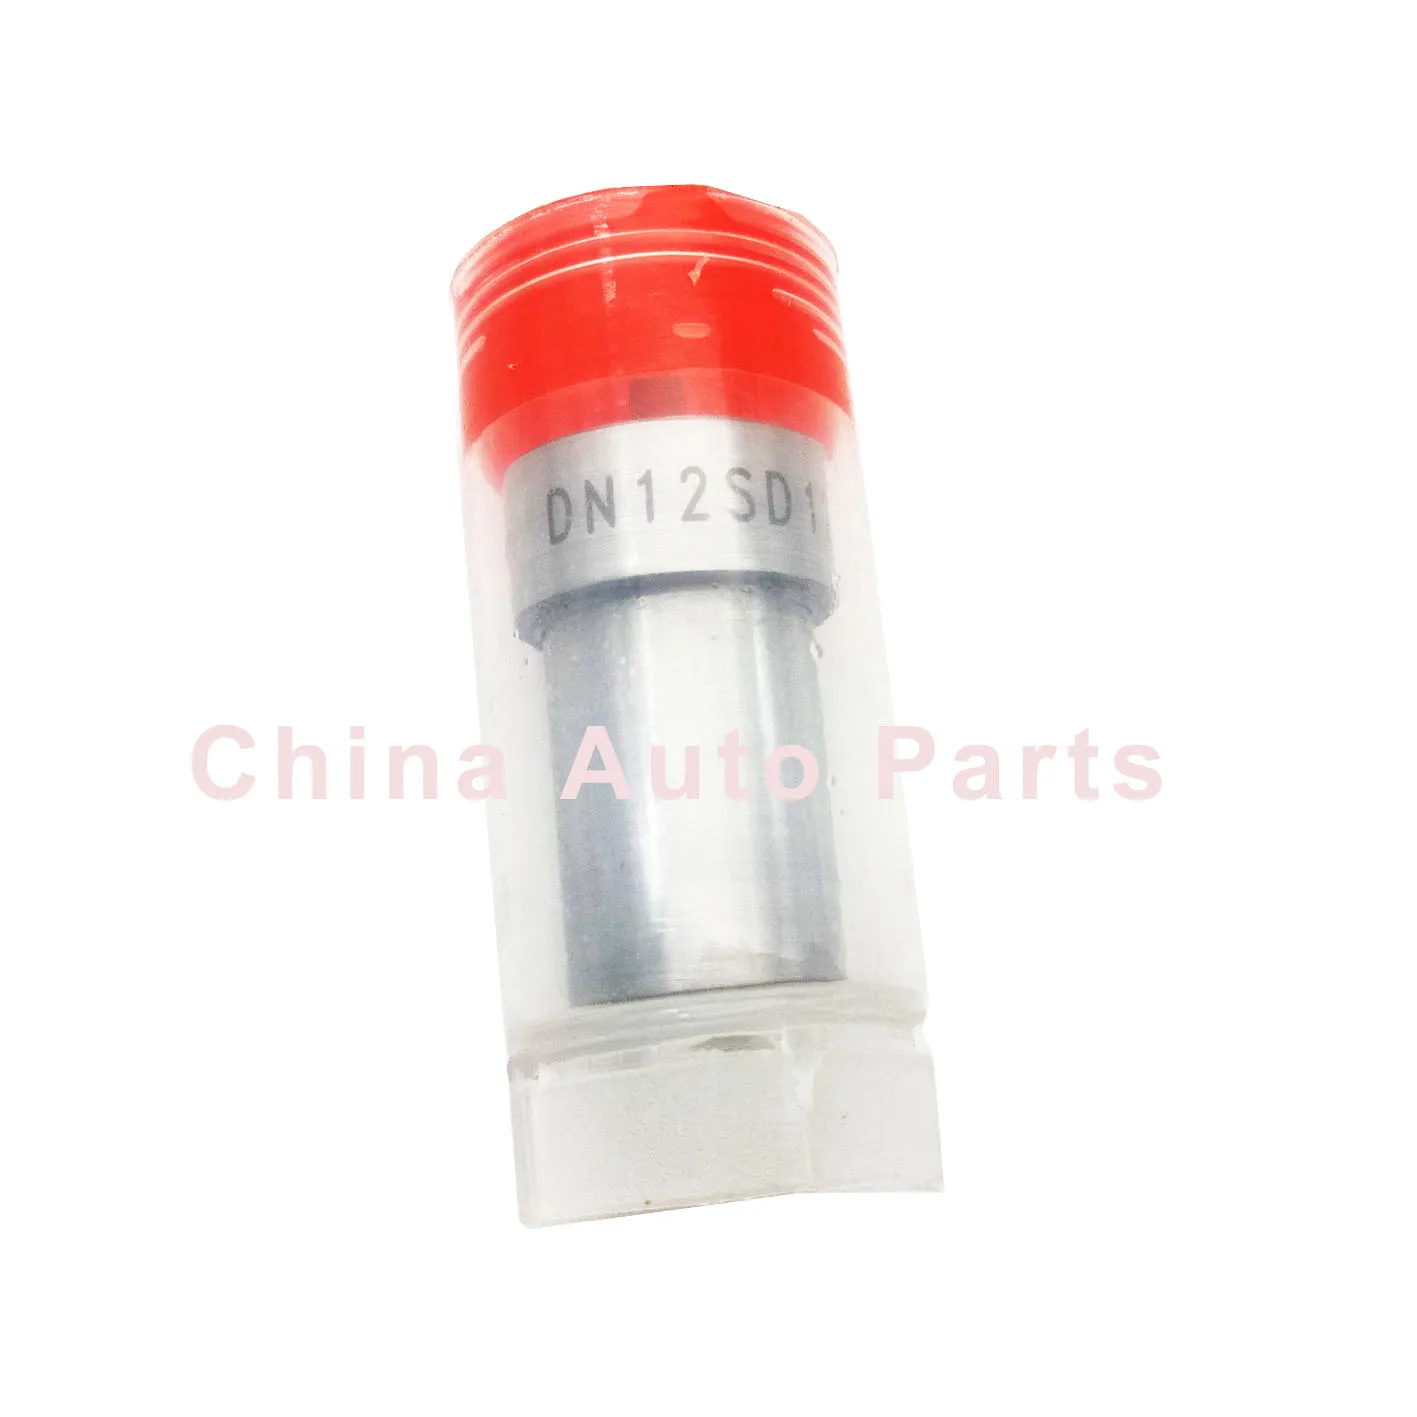 

Fuel Injector Nozzle ZS4S1 ZS15S15 CN-DN4SK1 DN12SD12 DN4SD24 DN0SD2110 DN0SD193 DN0SD211 DN0SD21 DN0SDN220 DN0SD211 1pc